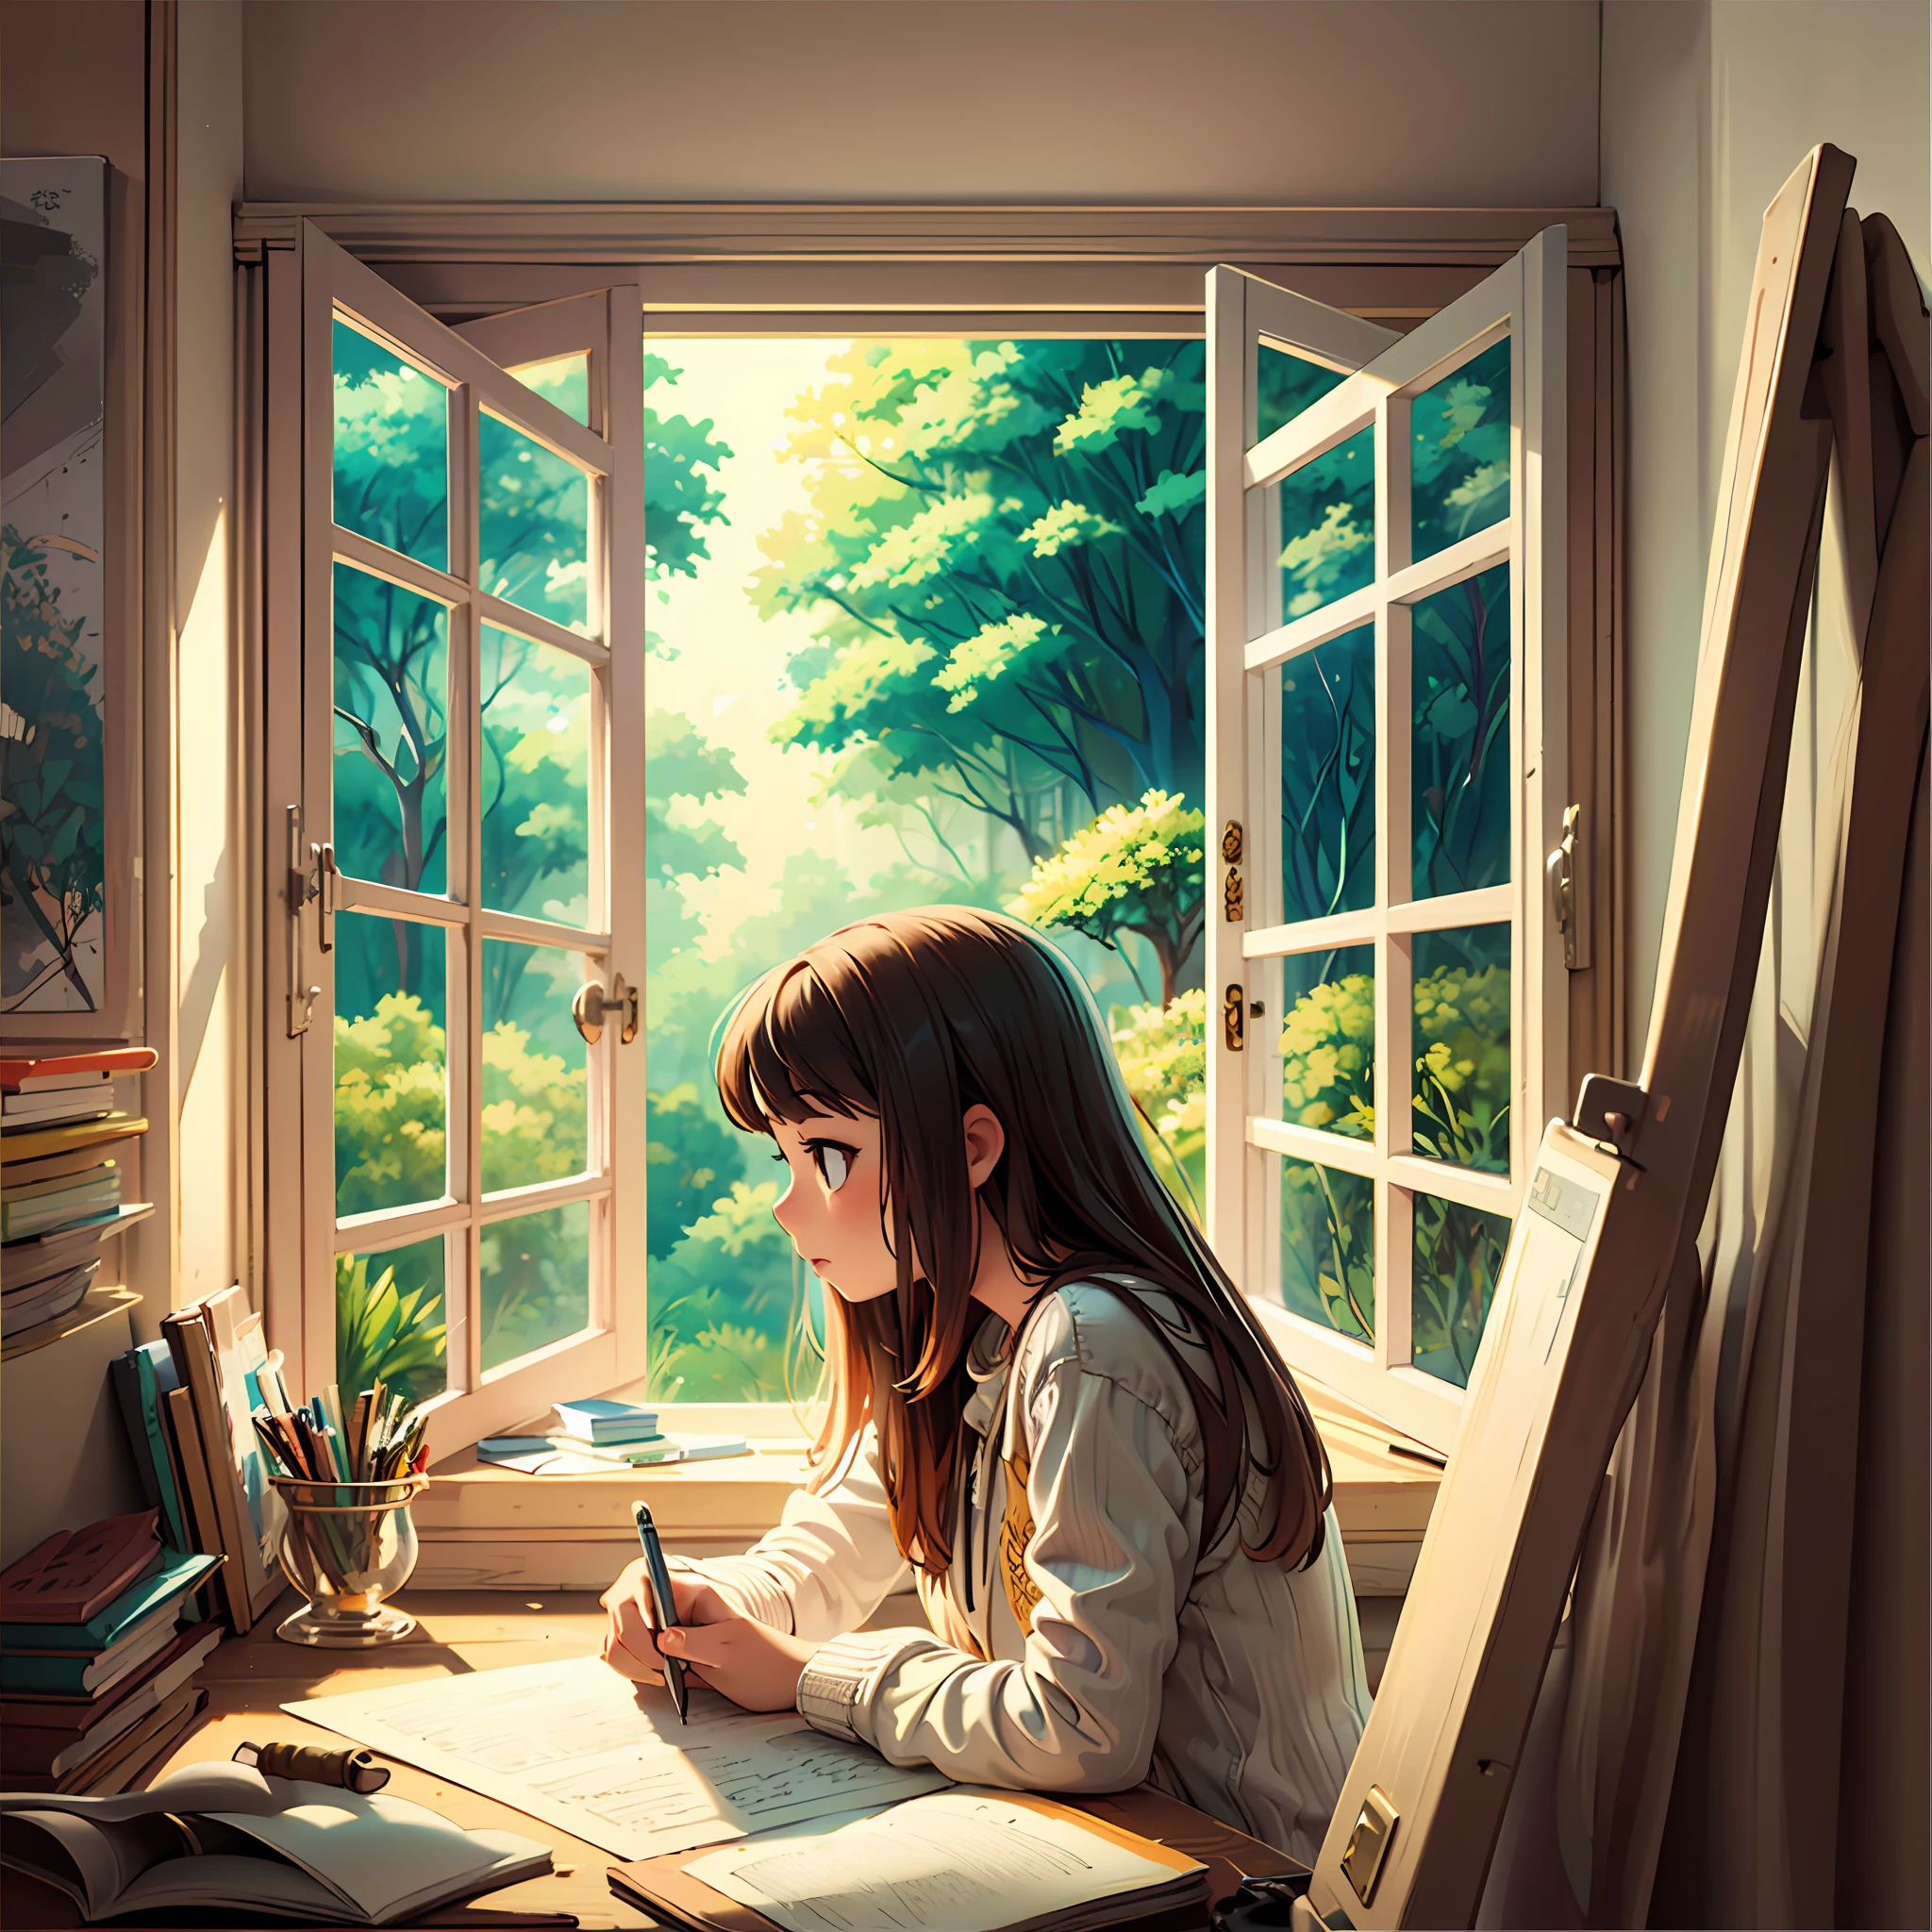 "1 girl sitting at a study table in front of a window, engrossed in writing and surrounded by books, capturing the beauty of nature through her artwork on a canvas " --auto